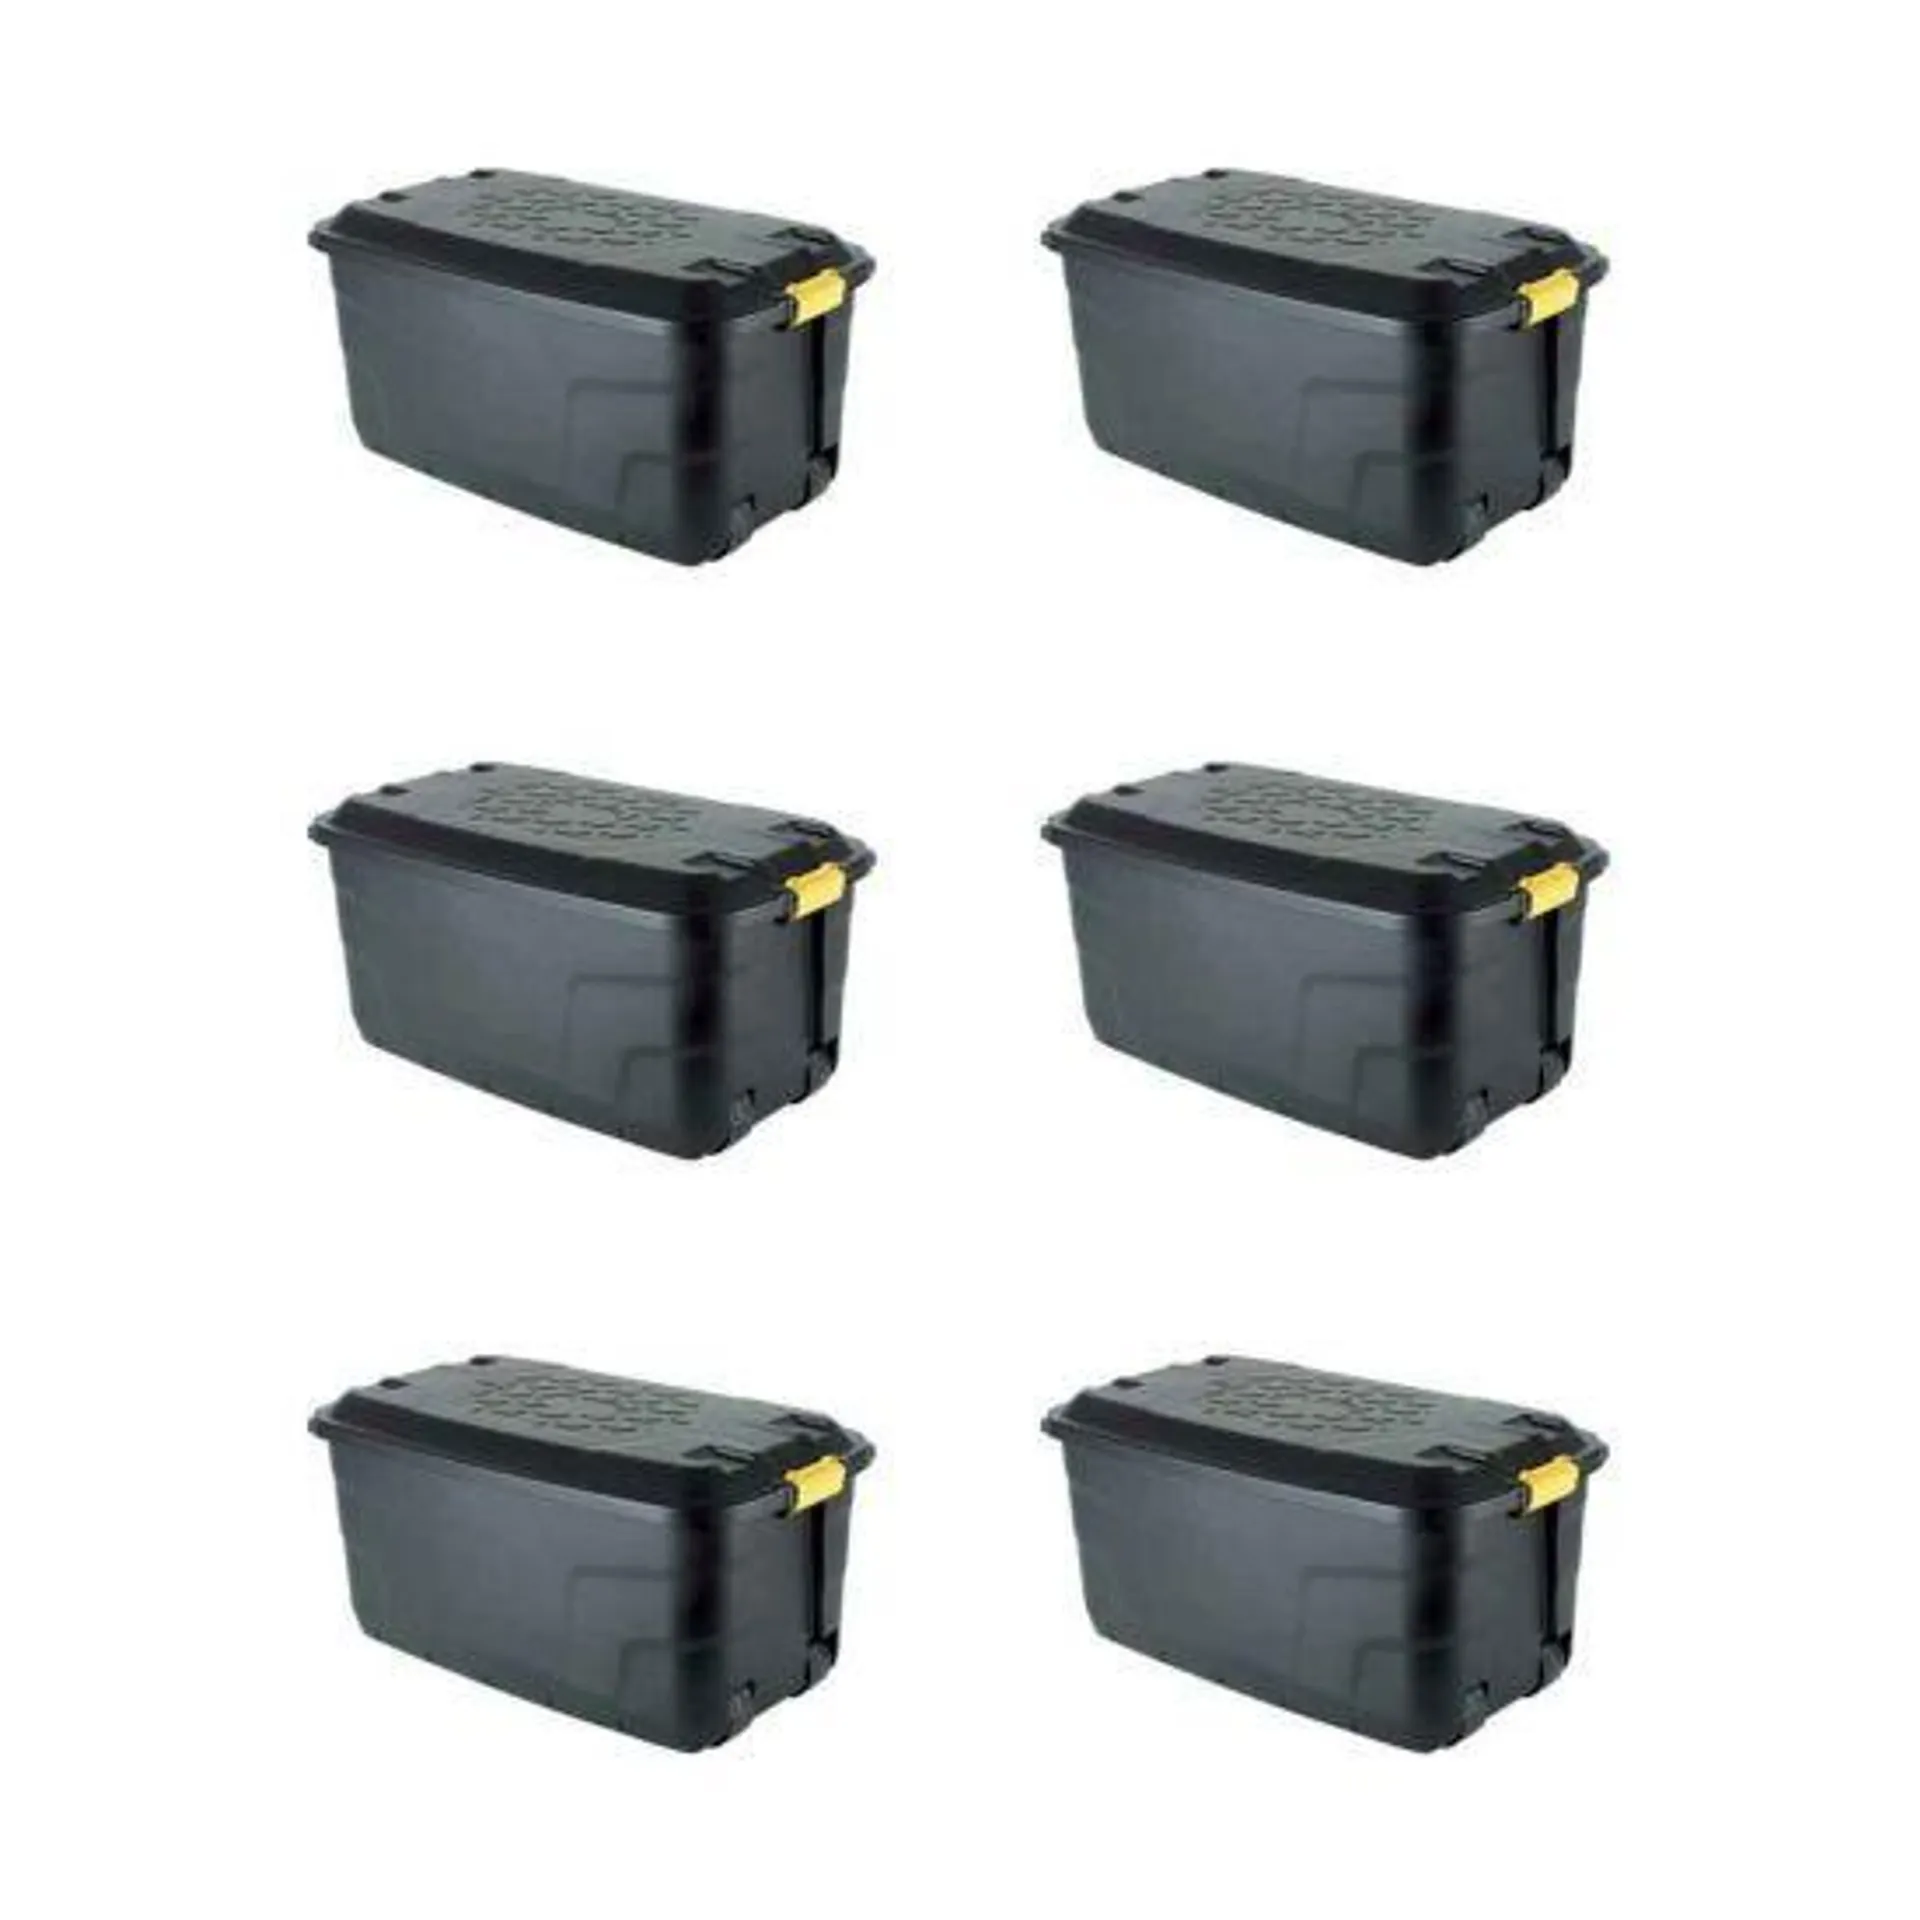 Strata Heavy Duty Storage Box with Wheels 145 Litre Pack of 6